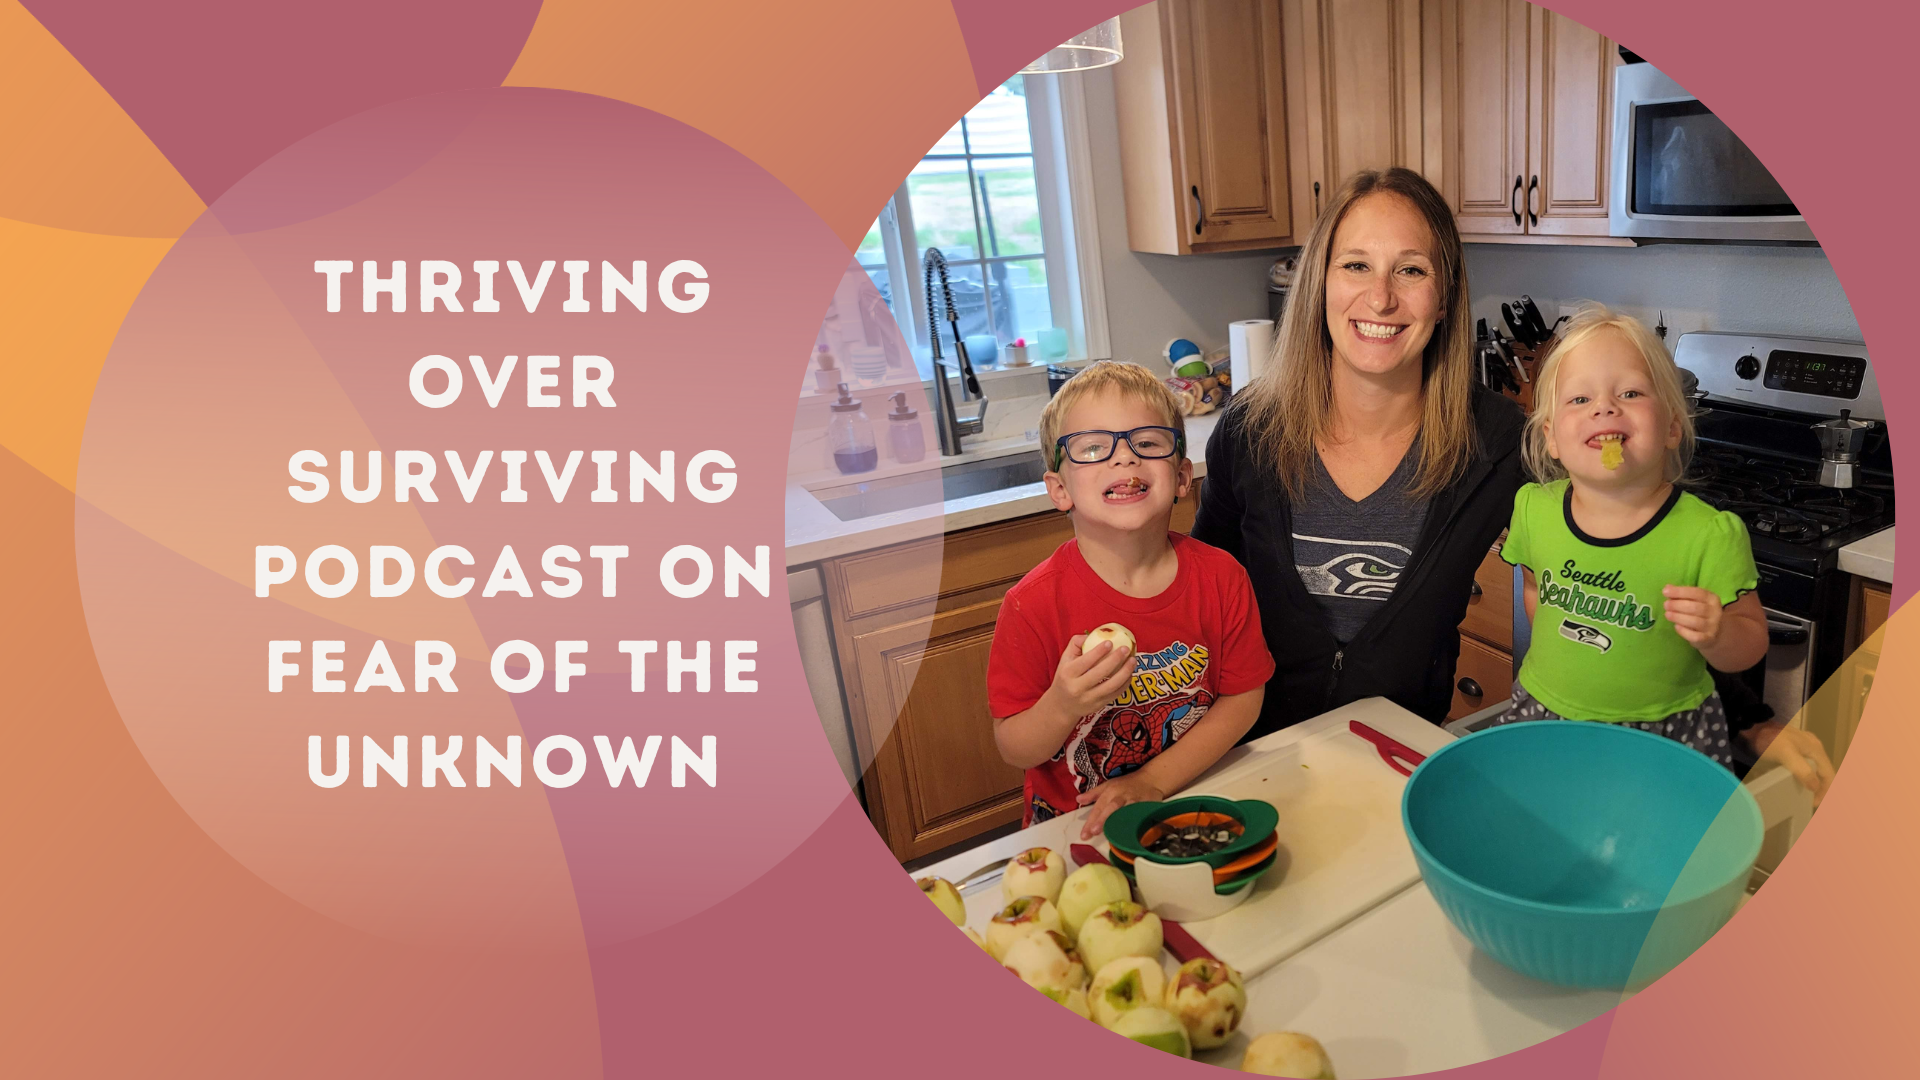 Thriving Over Surviving Podcast, Fear of the Unknown